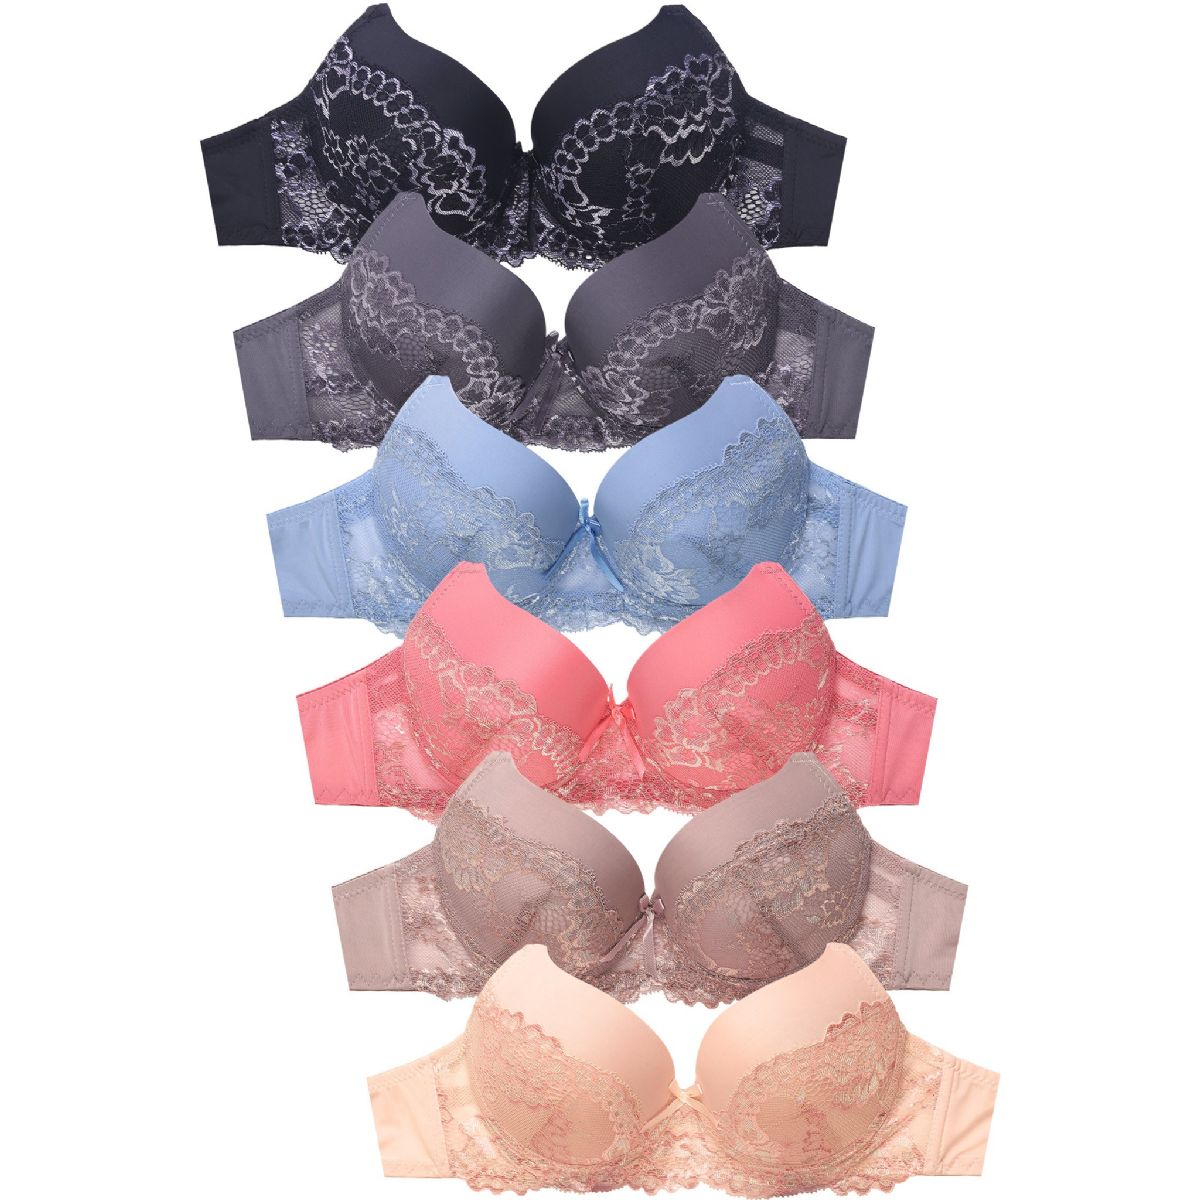 36 Wholesale Sofra Ladies Full Cup Plain Lace Push Up Bra 36c - at 